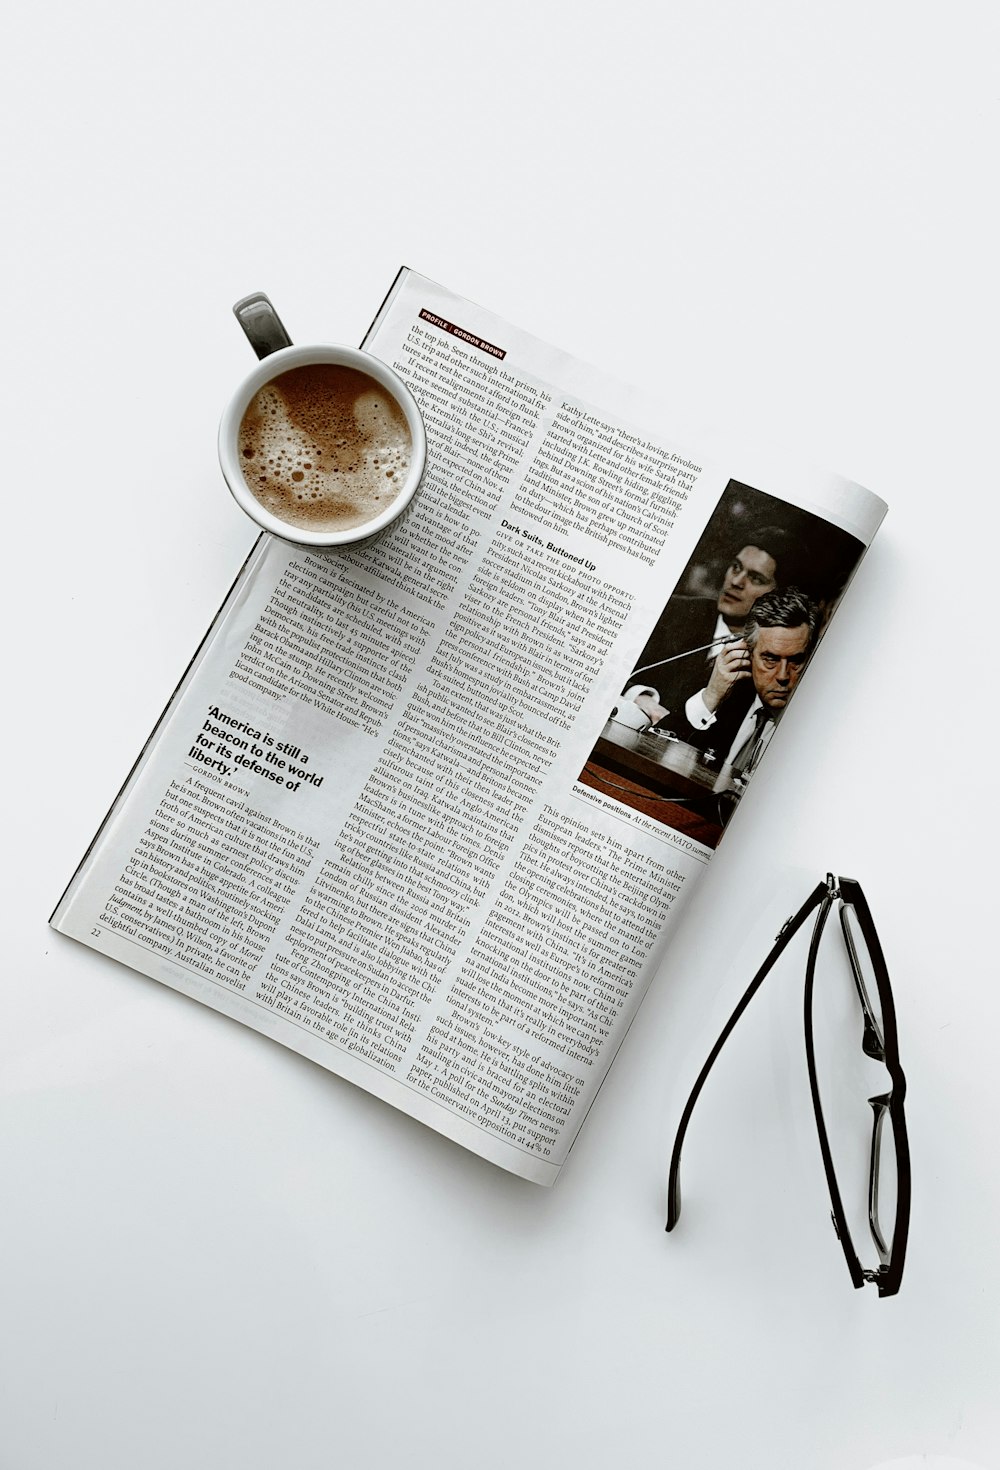 a cup of coffee sitting on top of a newspaper next to a pair of glasses